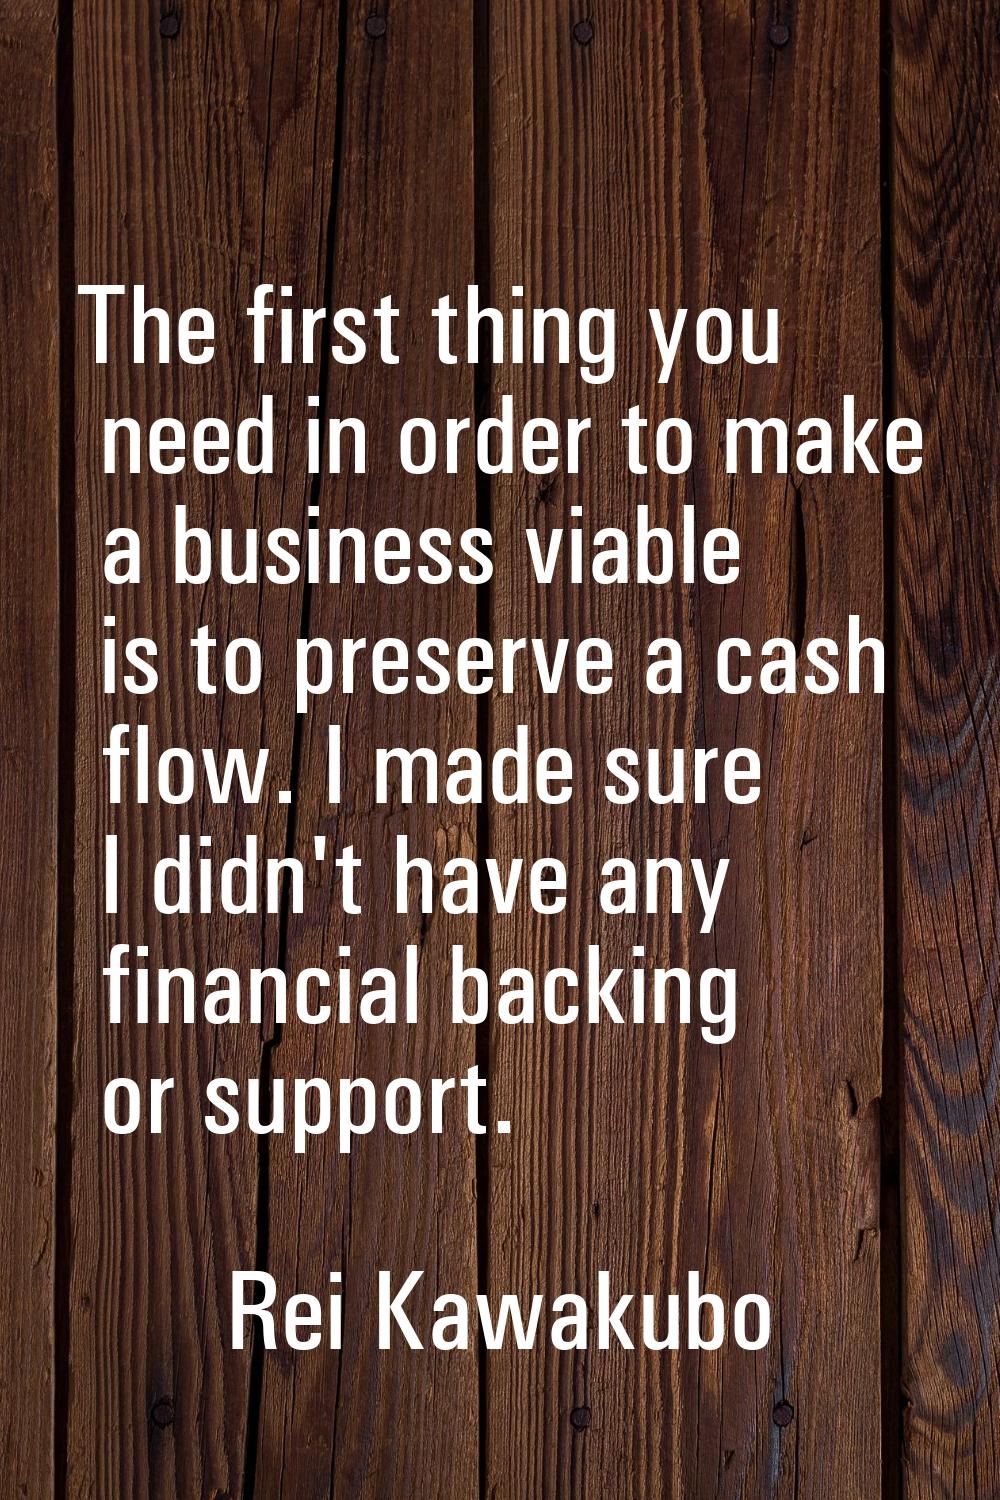 The first thing you need in order to make a business viable is to preserve a cash flow. I made sure